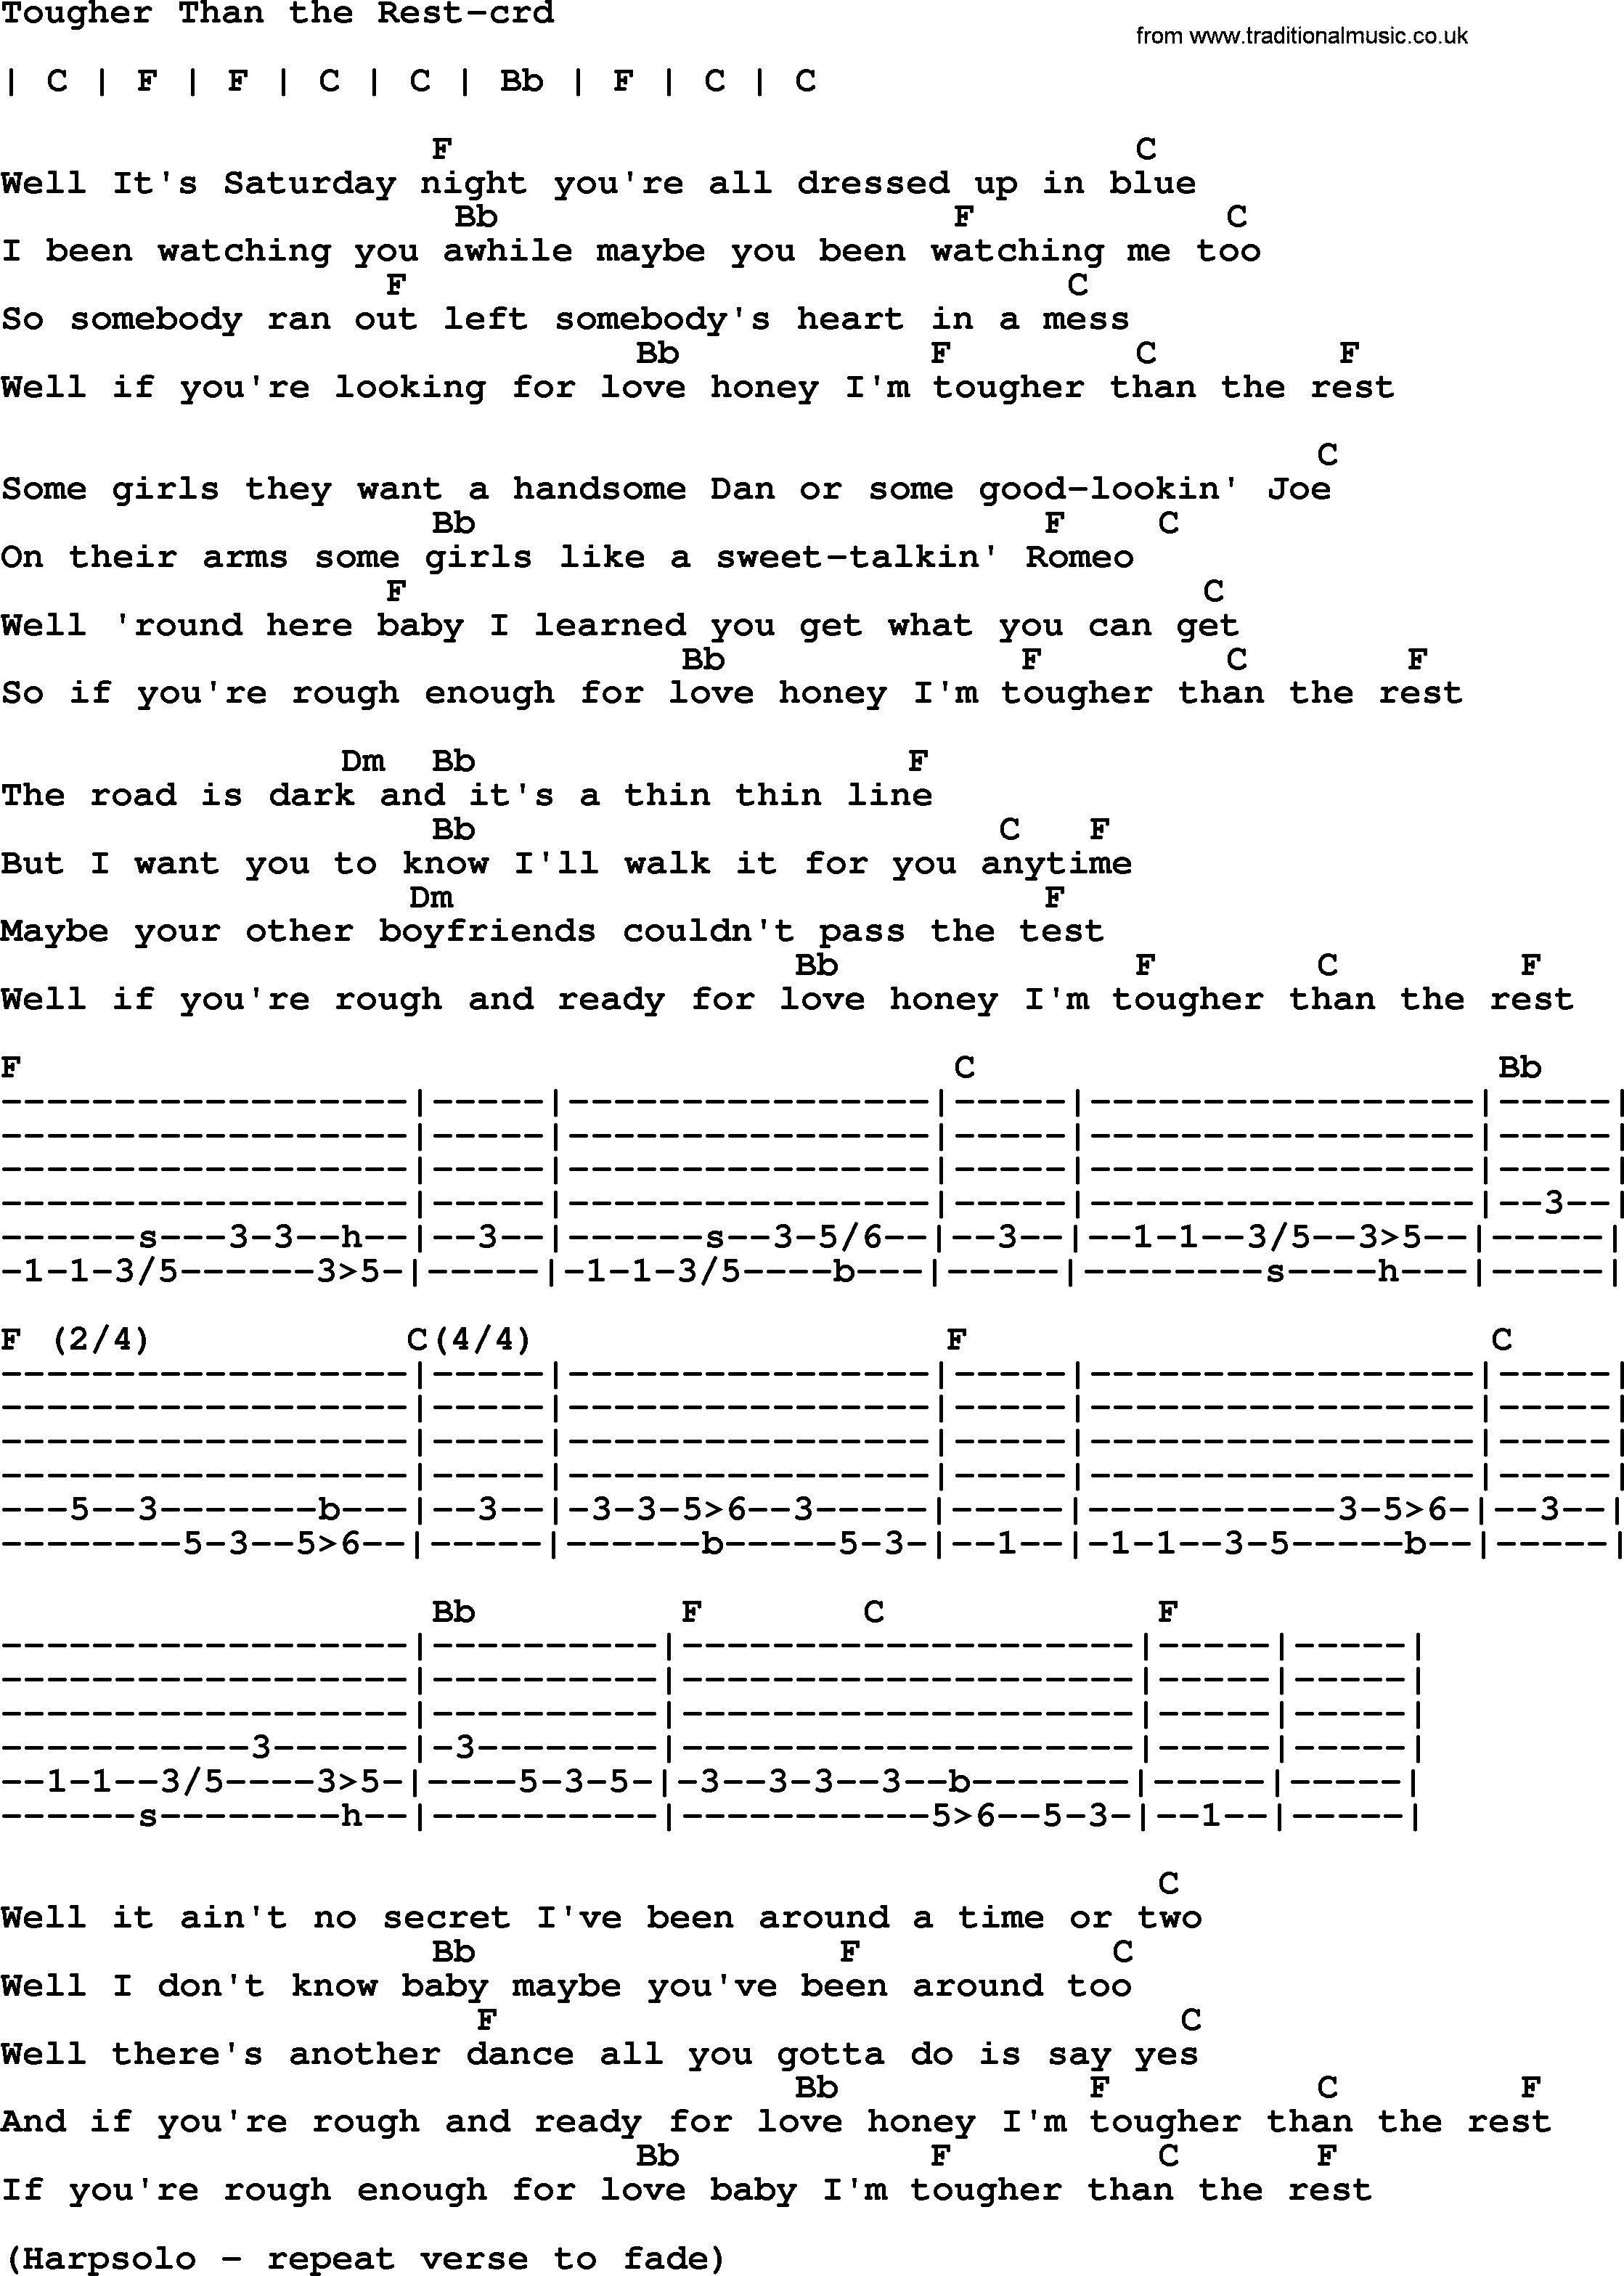 Bruce Springsteen song: Tougher Than The Rest, lyrics and chords